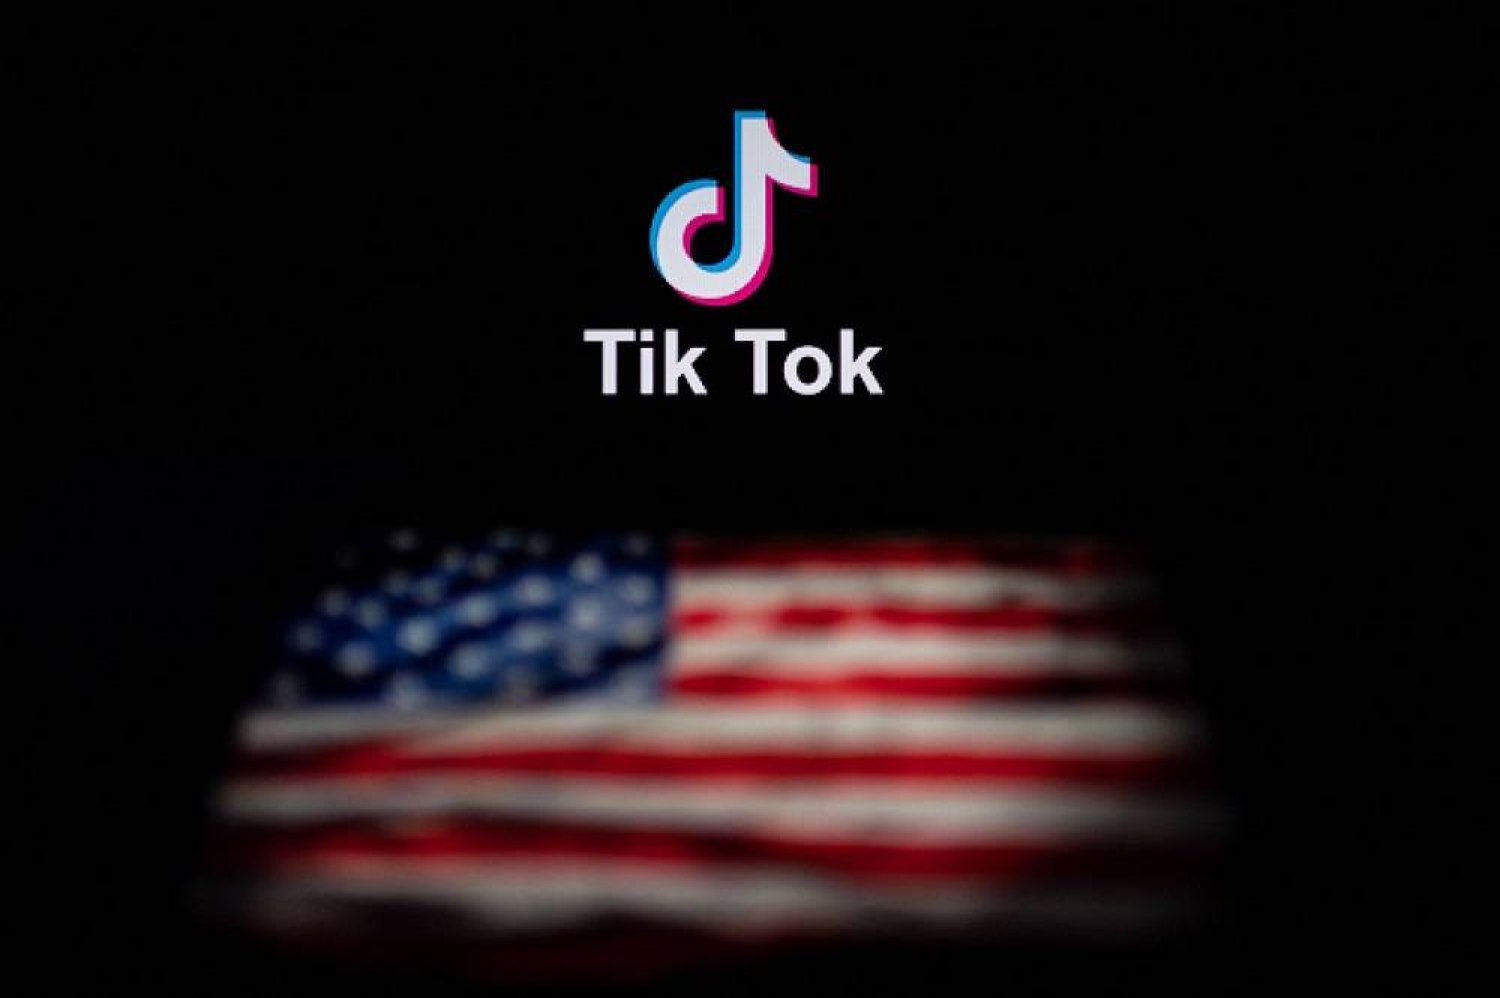  This photo illustration taken on September 14, 2020 shows the logo of the social network application TikTok (top) and a US flag (bottom) shown on the screens of two laptops in Beijing. (AFP)